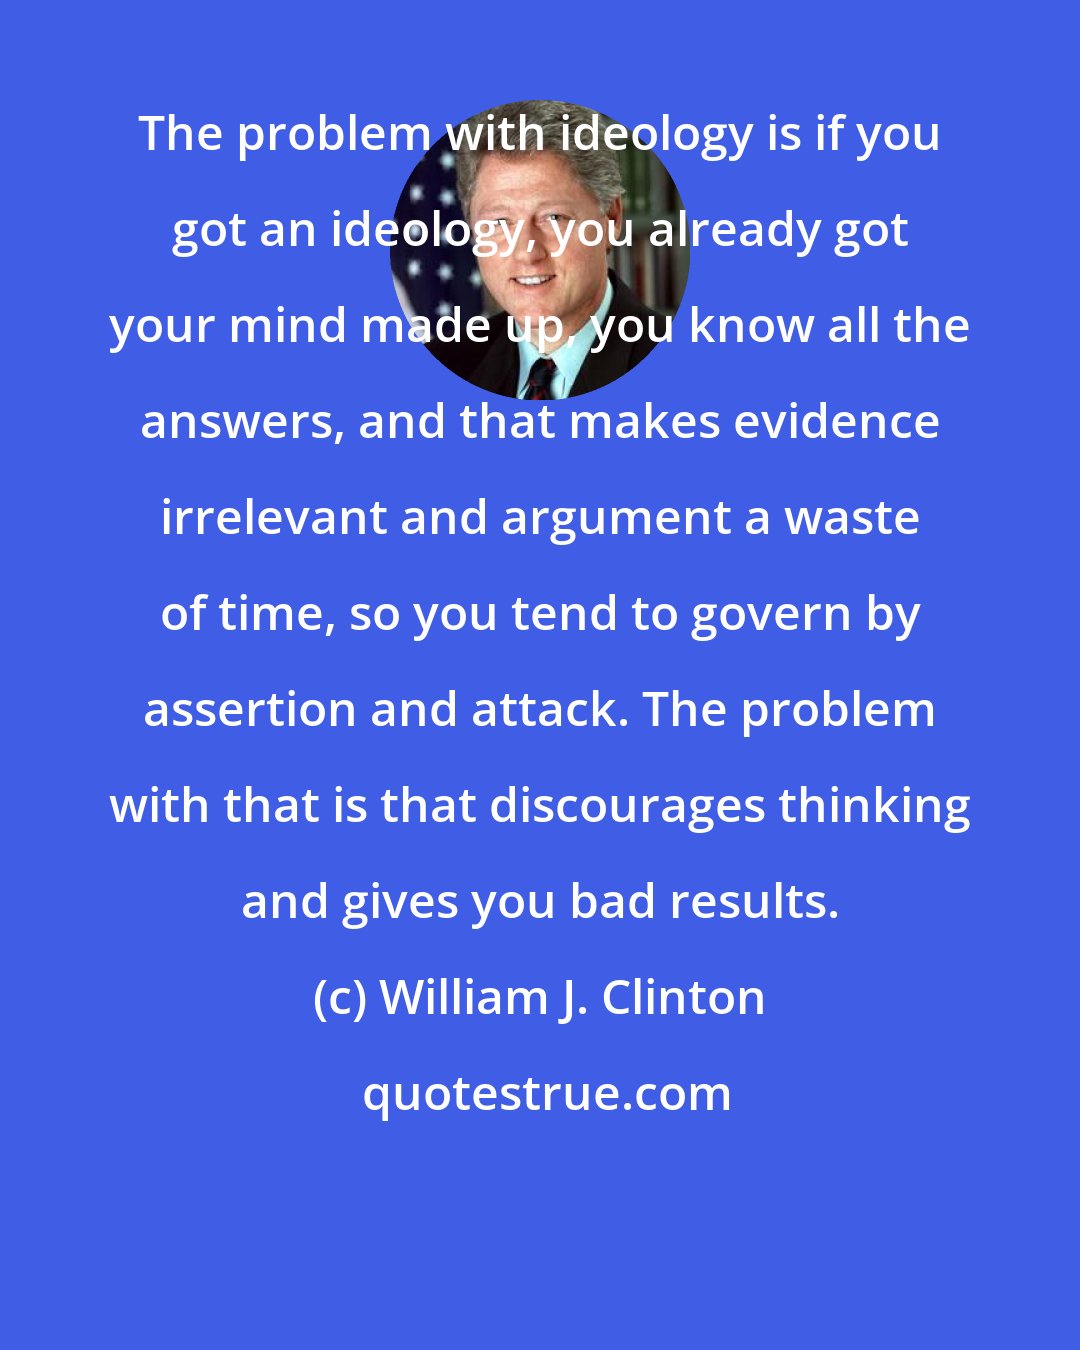 William J. Clinton: The problem with ideology is if you got an ideology, you already got your mind made up, you know all the answers, and that makes evidence irrelevant and argument a waste of time, so you tend to govern by assertion and attack. The problem with that is that discourages thinking and gives you bad results.